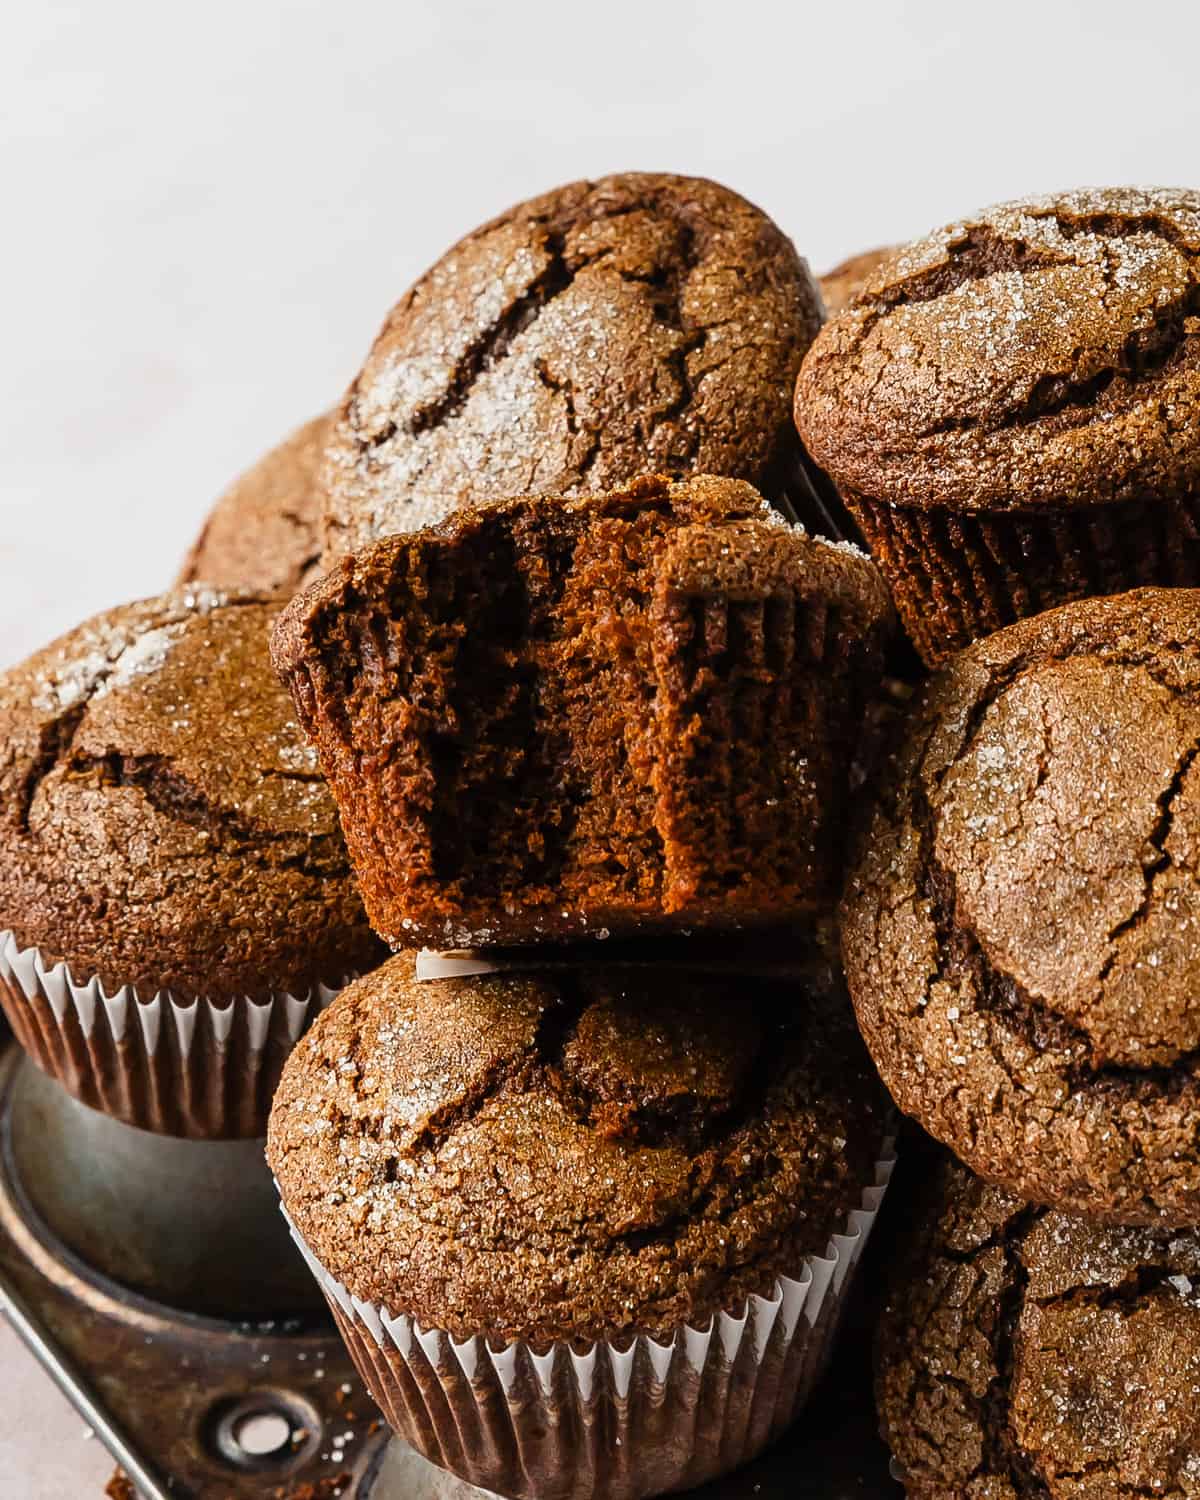 Gingerbread muffins are soft and fluffy, bakery style molasses muffins. They are filled with lots of cozy warming spices and are topped with crunchy sugar. These ginger muffins are easy to make and will be your favorite winter muffin recipe. 